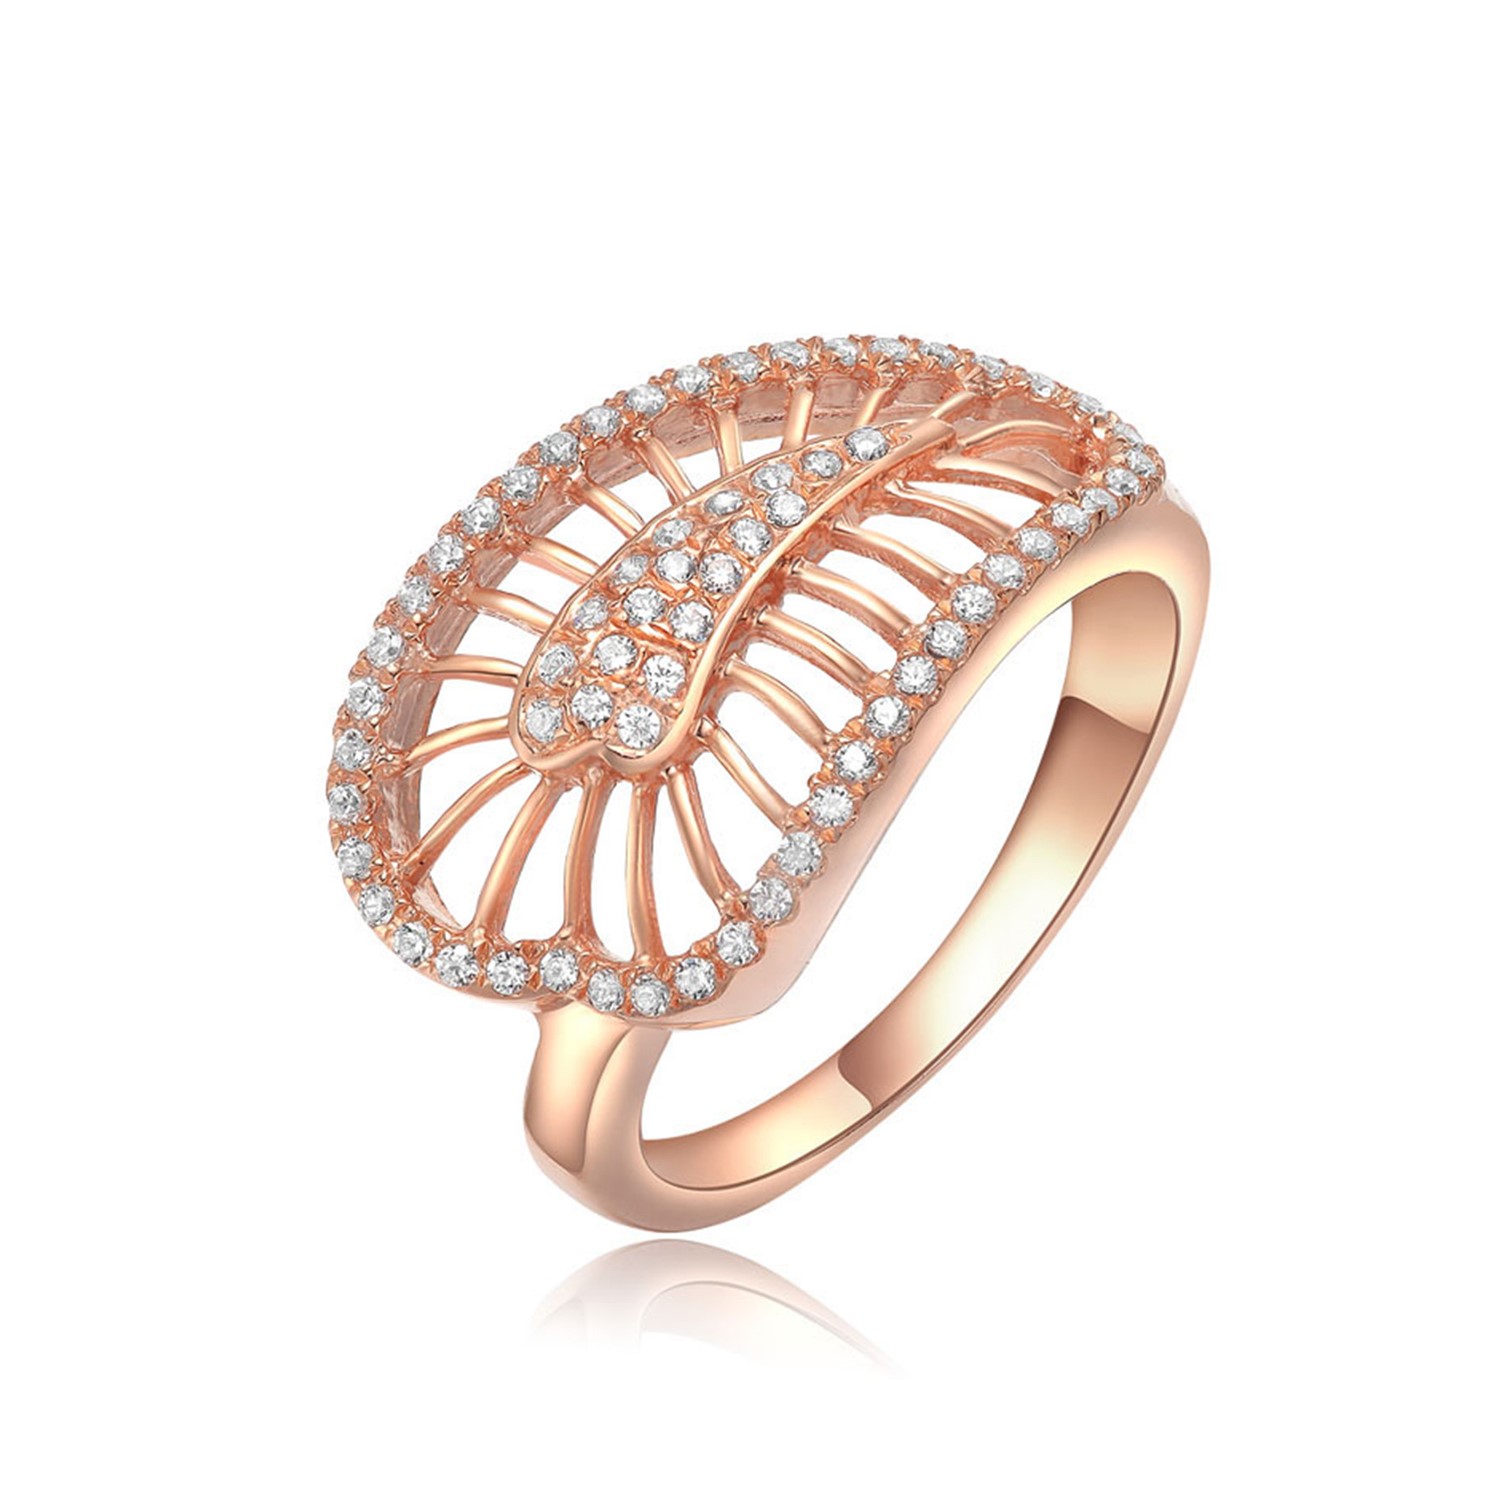 High quality new design ring rose gold plated cubic zirconia ladies jewellery 925 sterling silver ring